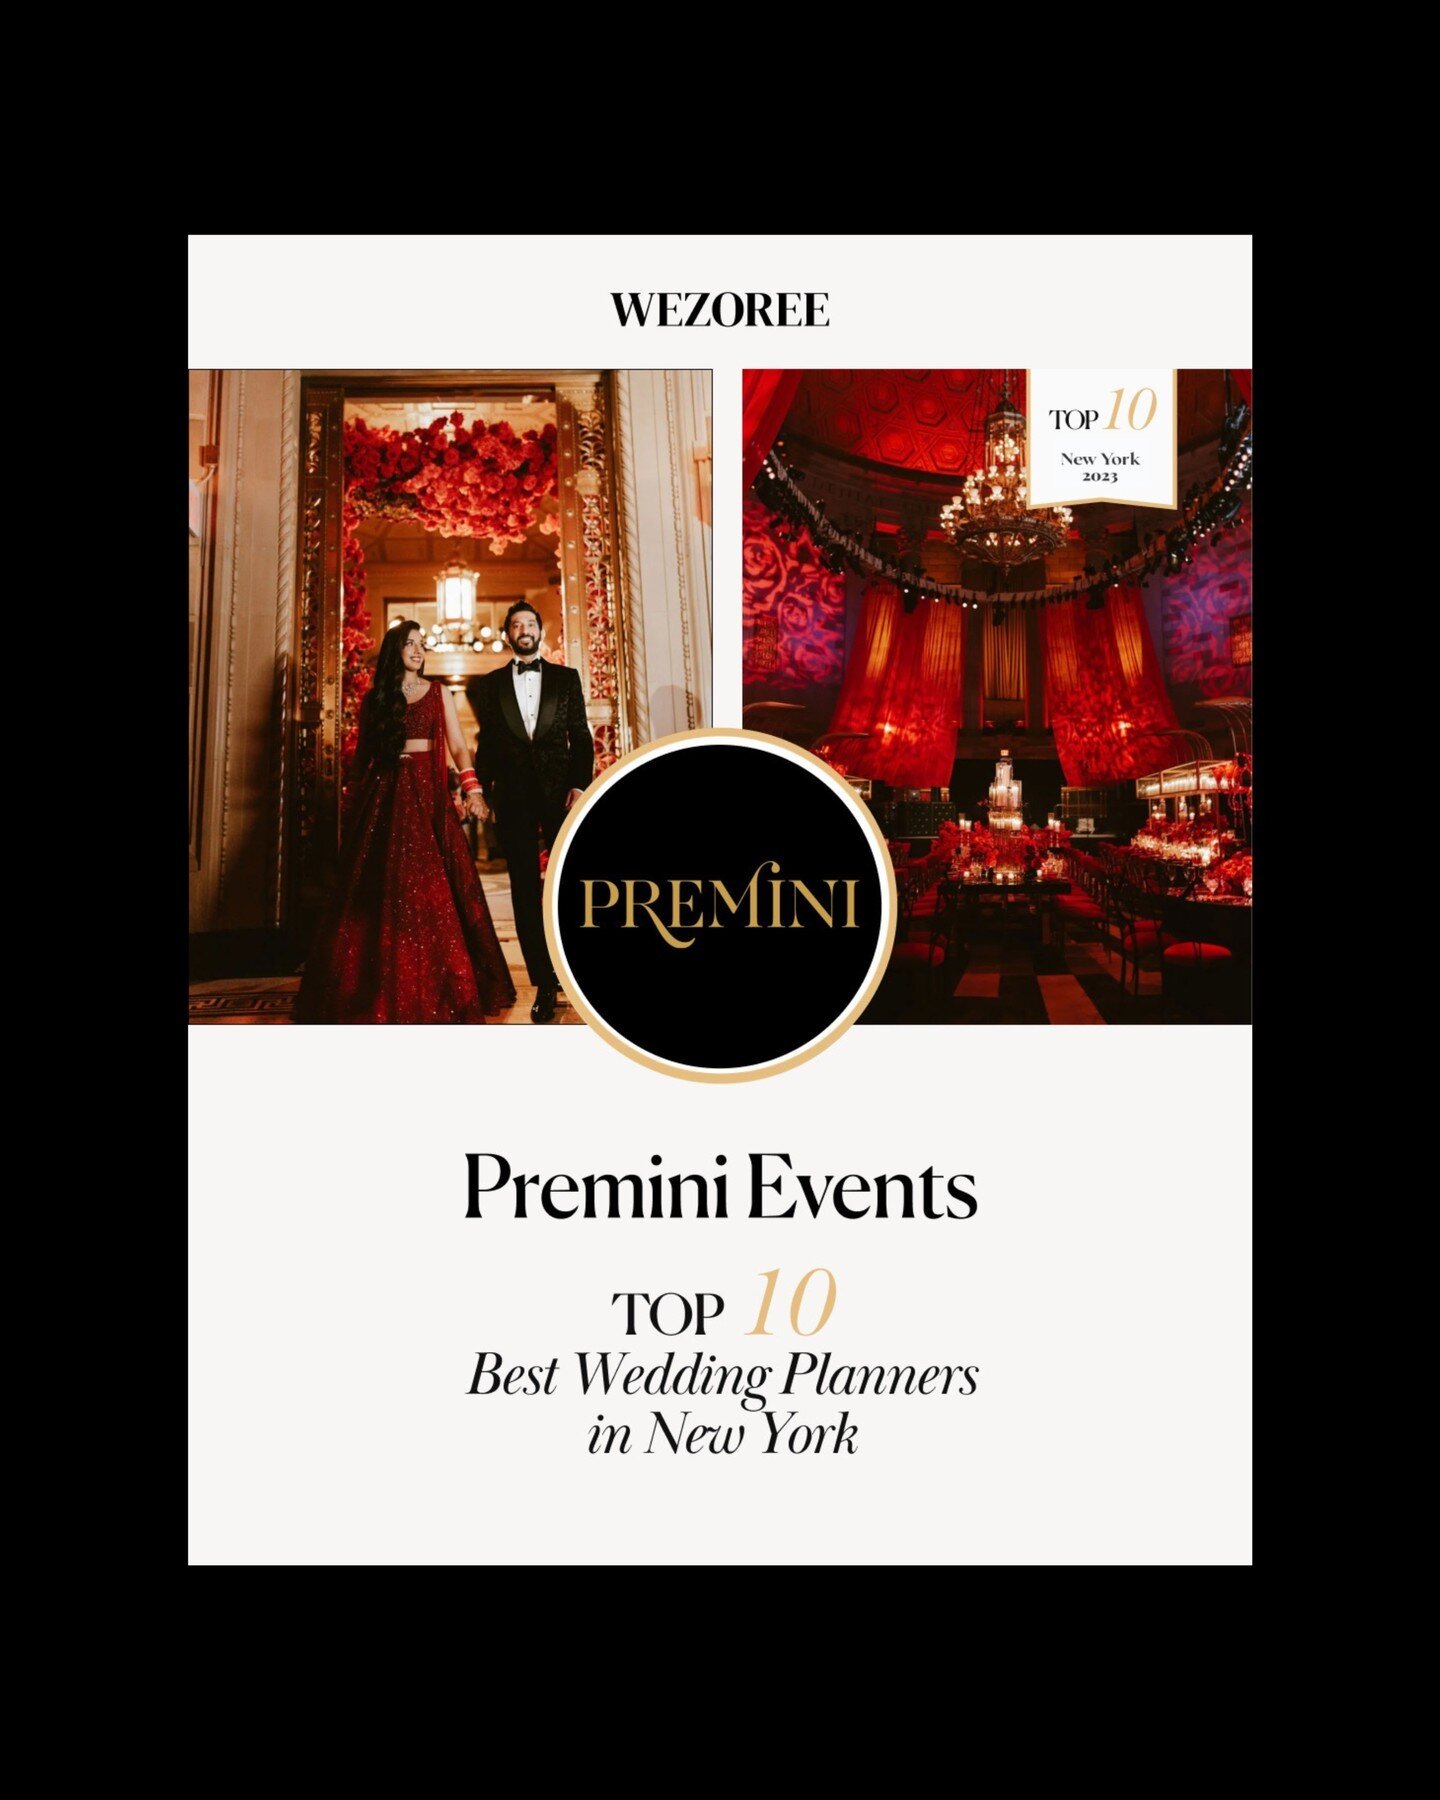 Day 2 of our 12 days of Christmas series is a present for US! We recently had the honor of being named one of the top 10 best wedding planners in New York by Wezoree, and we couldn't be more grateful. Our team is more motivated than ever to keep push